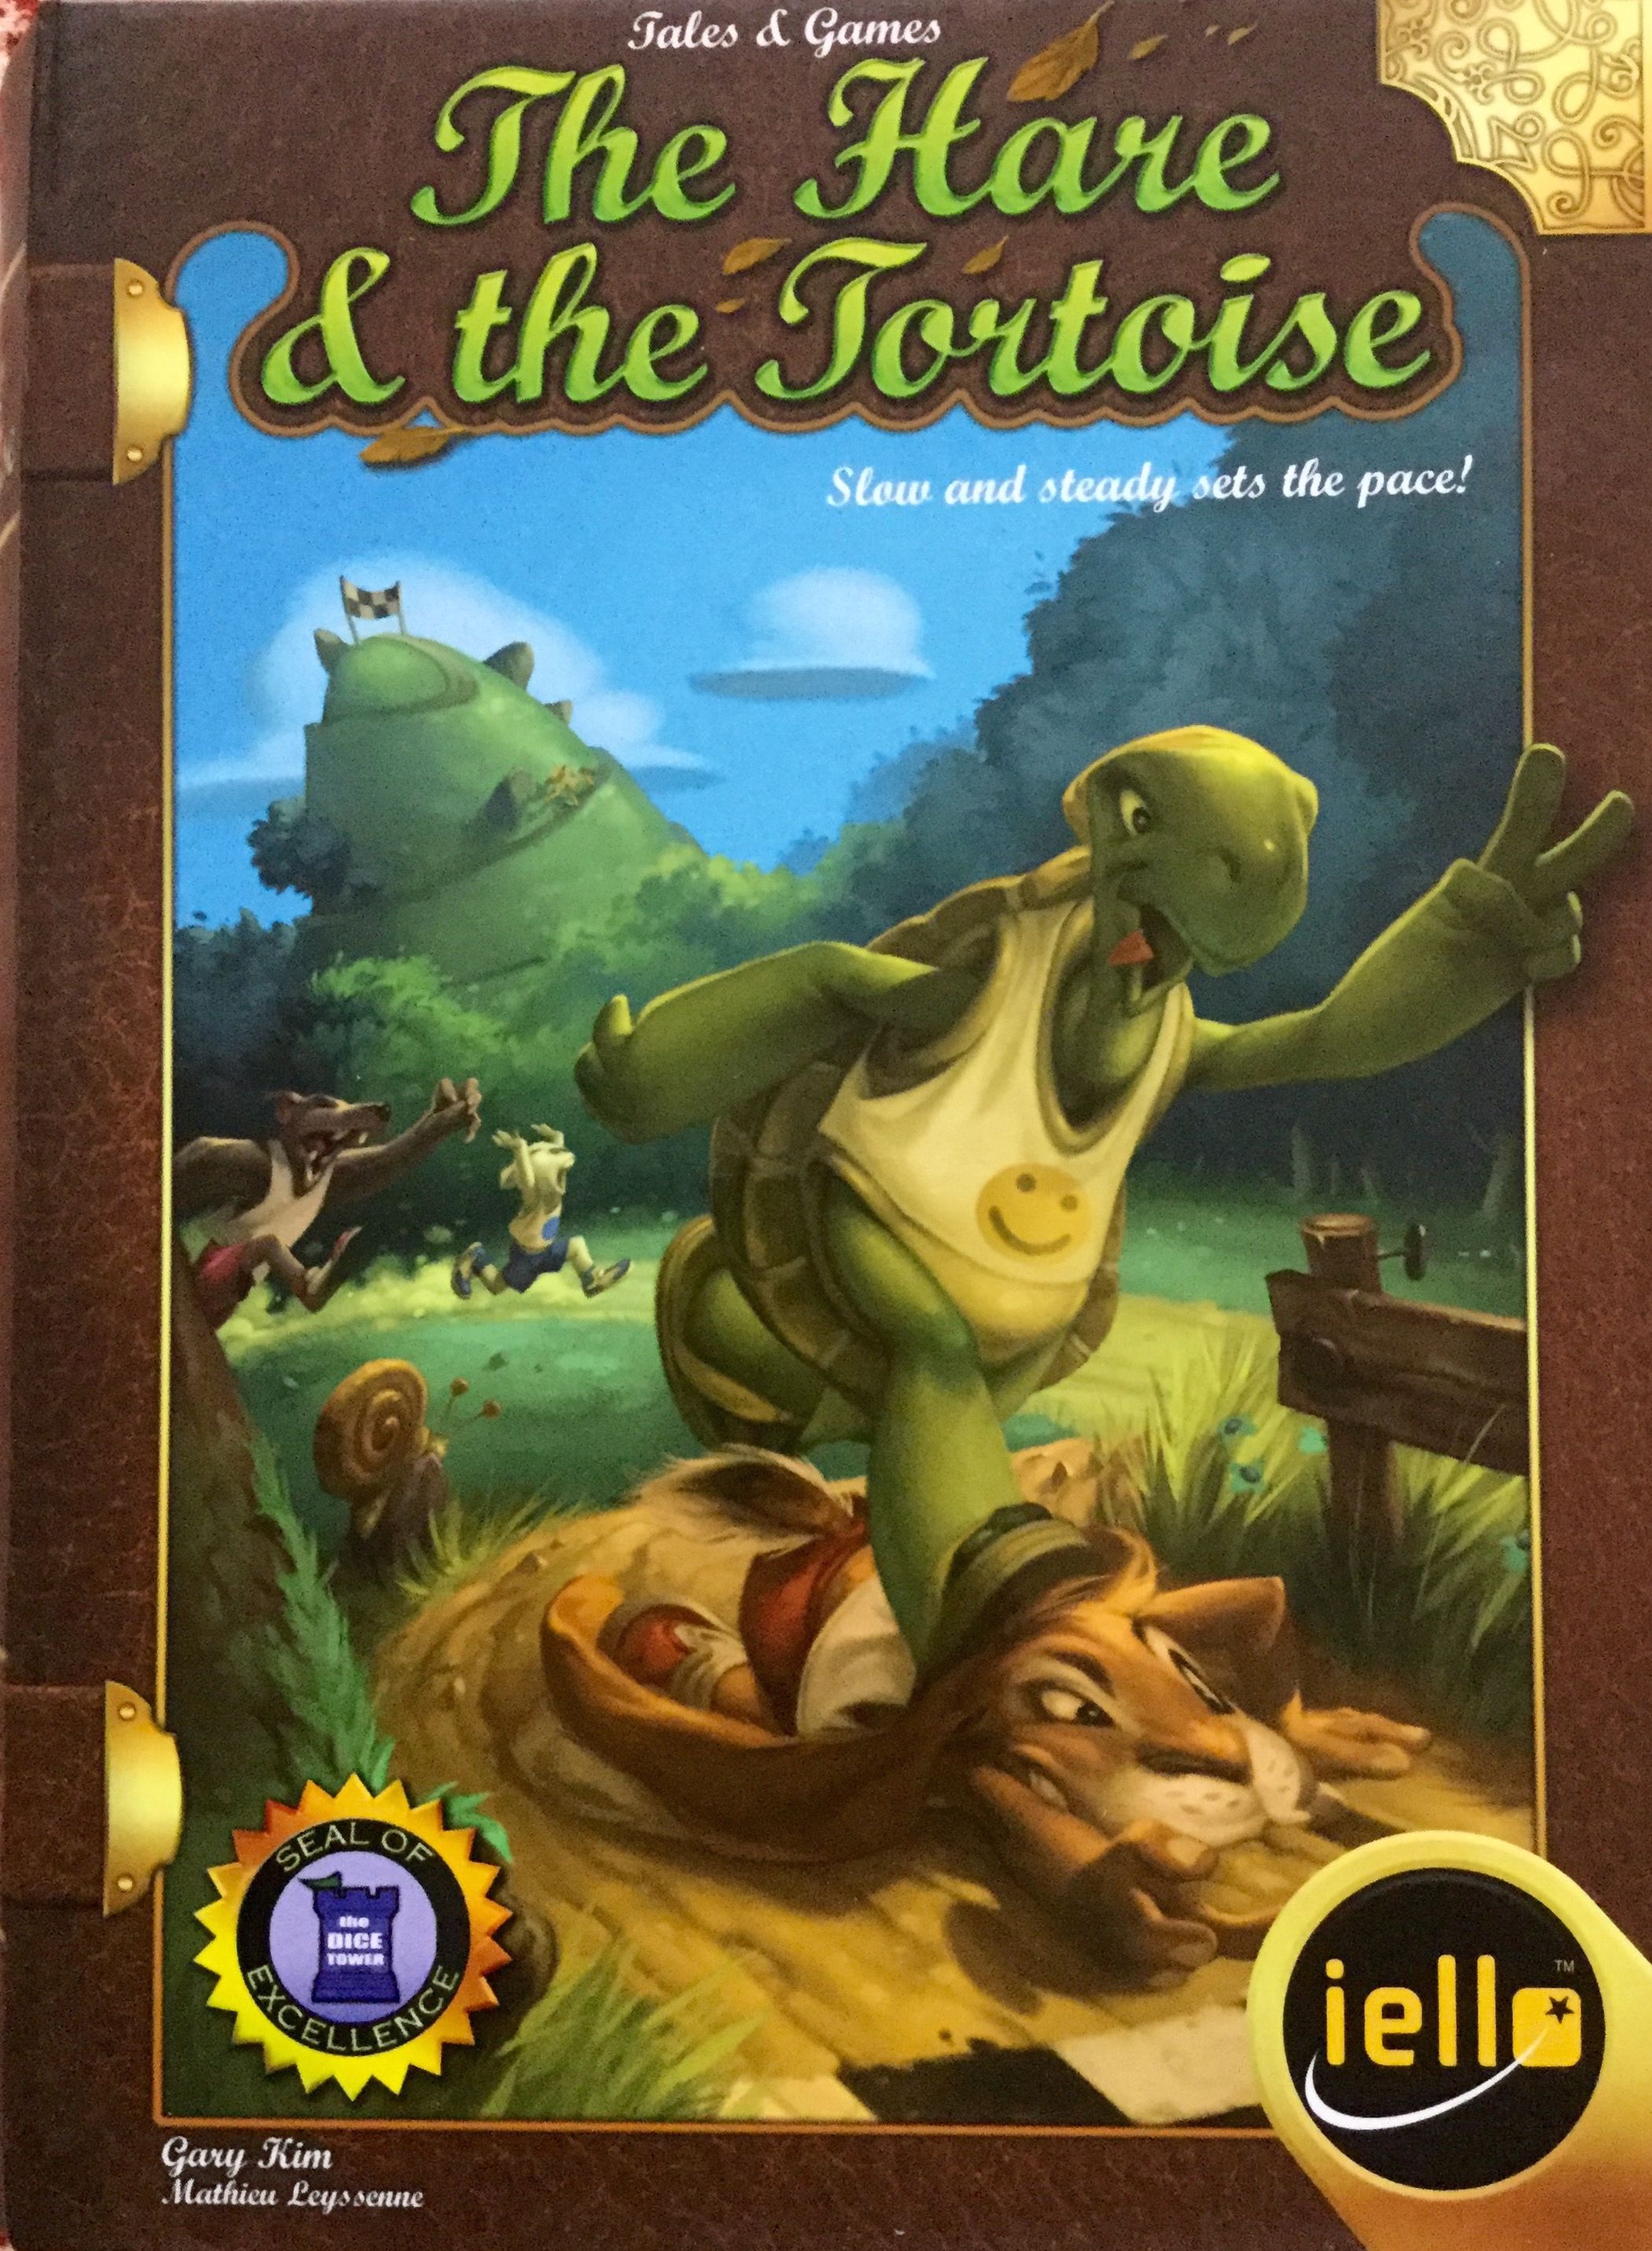 Tales & Games: The Hare & the Tortoise